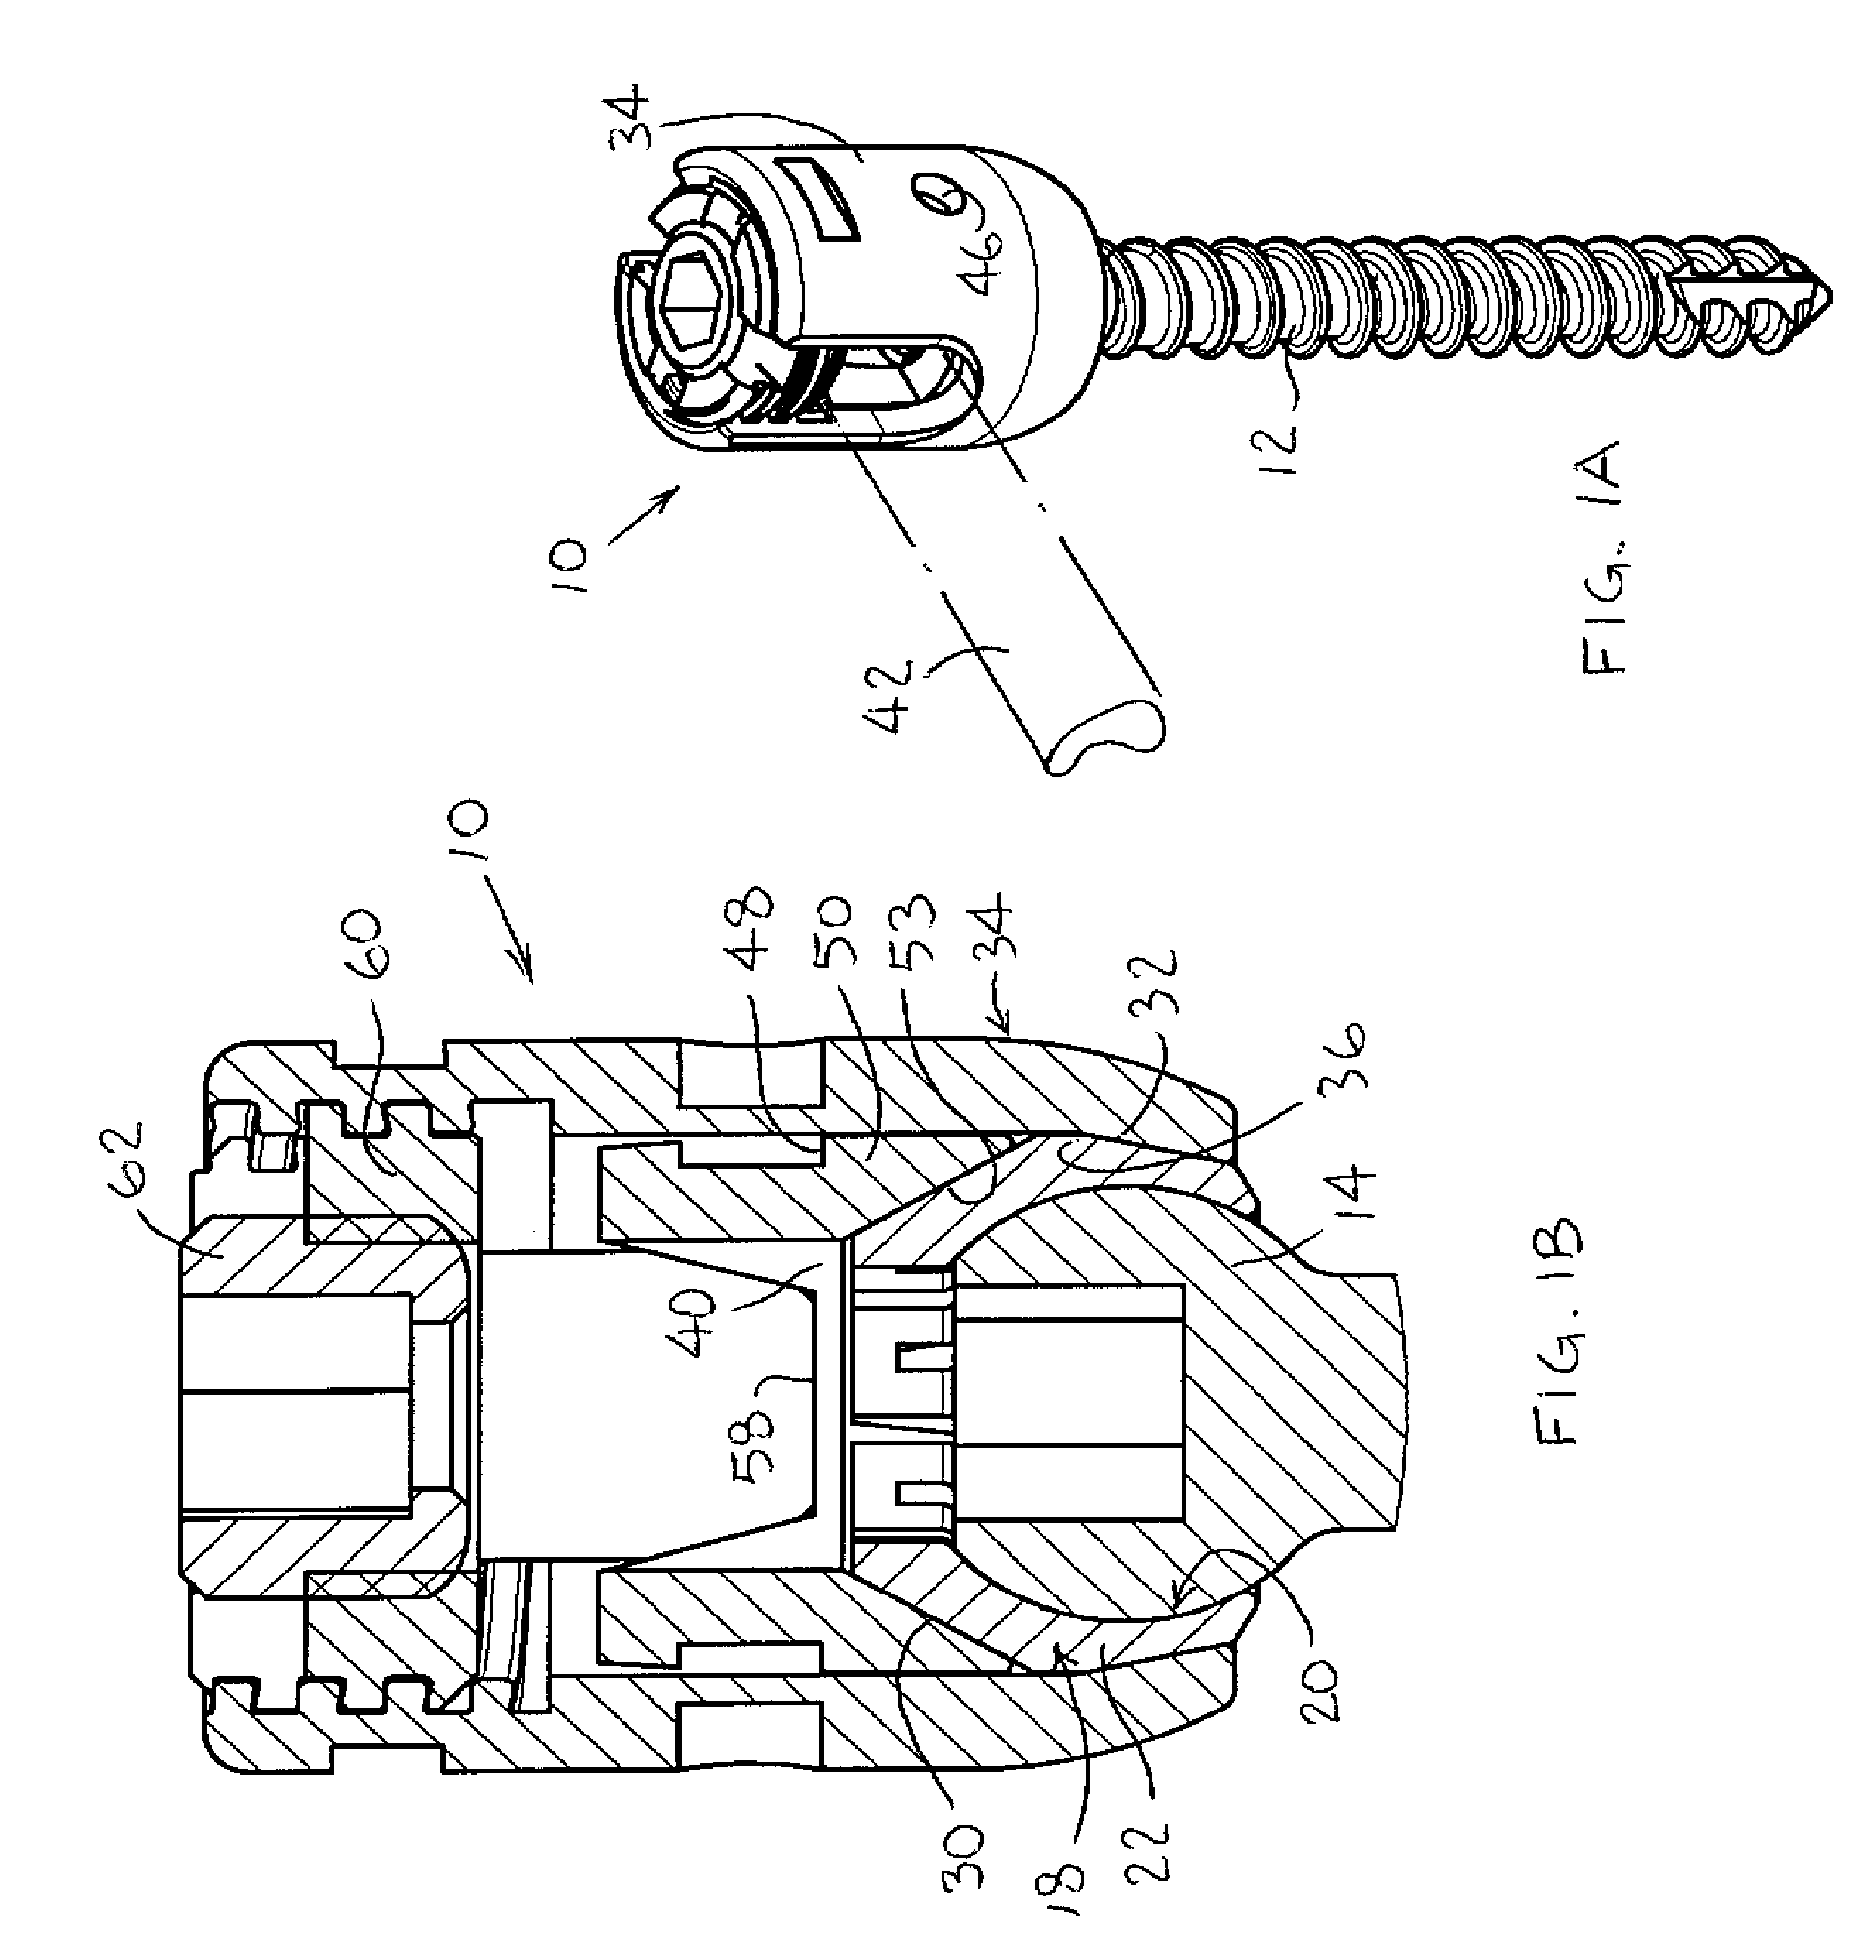 Double collet connector assembly for bone anchoring element